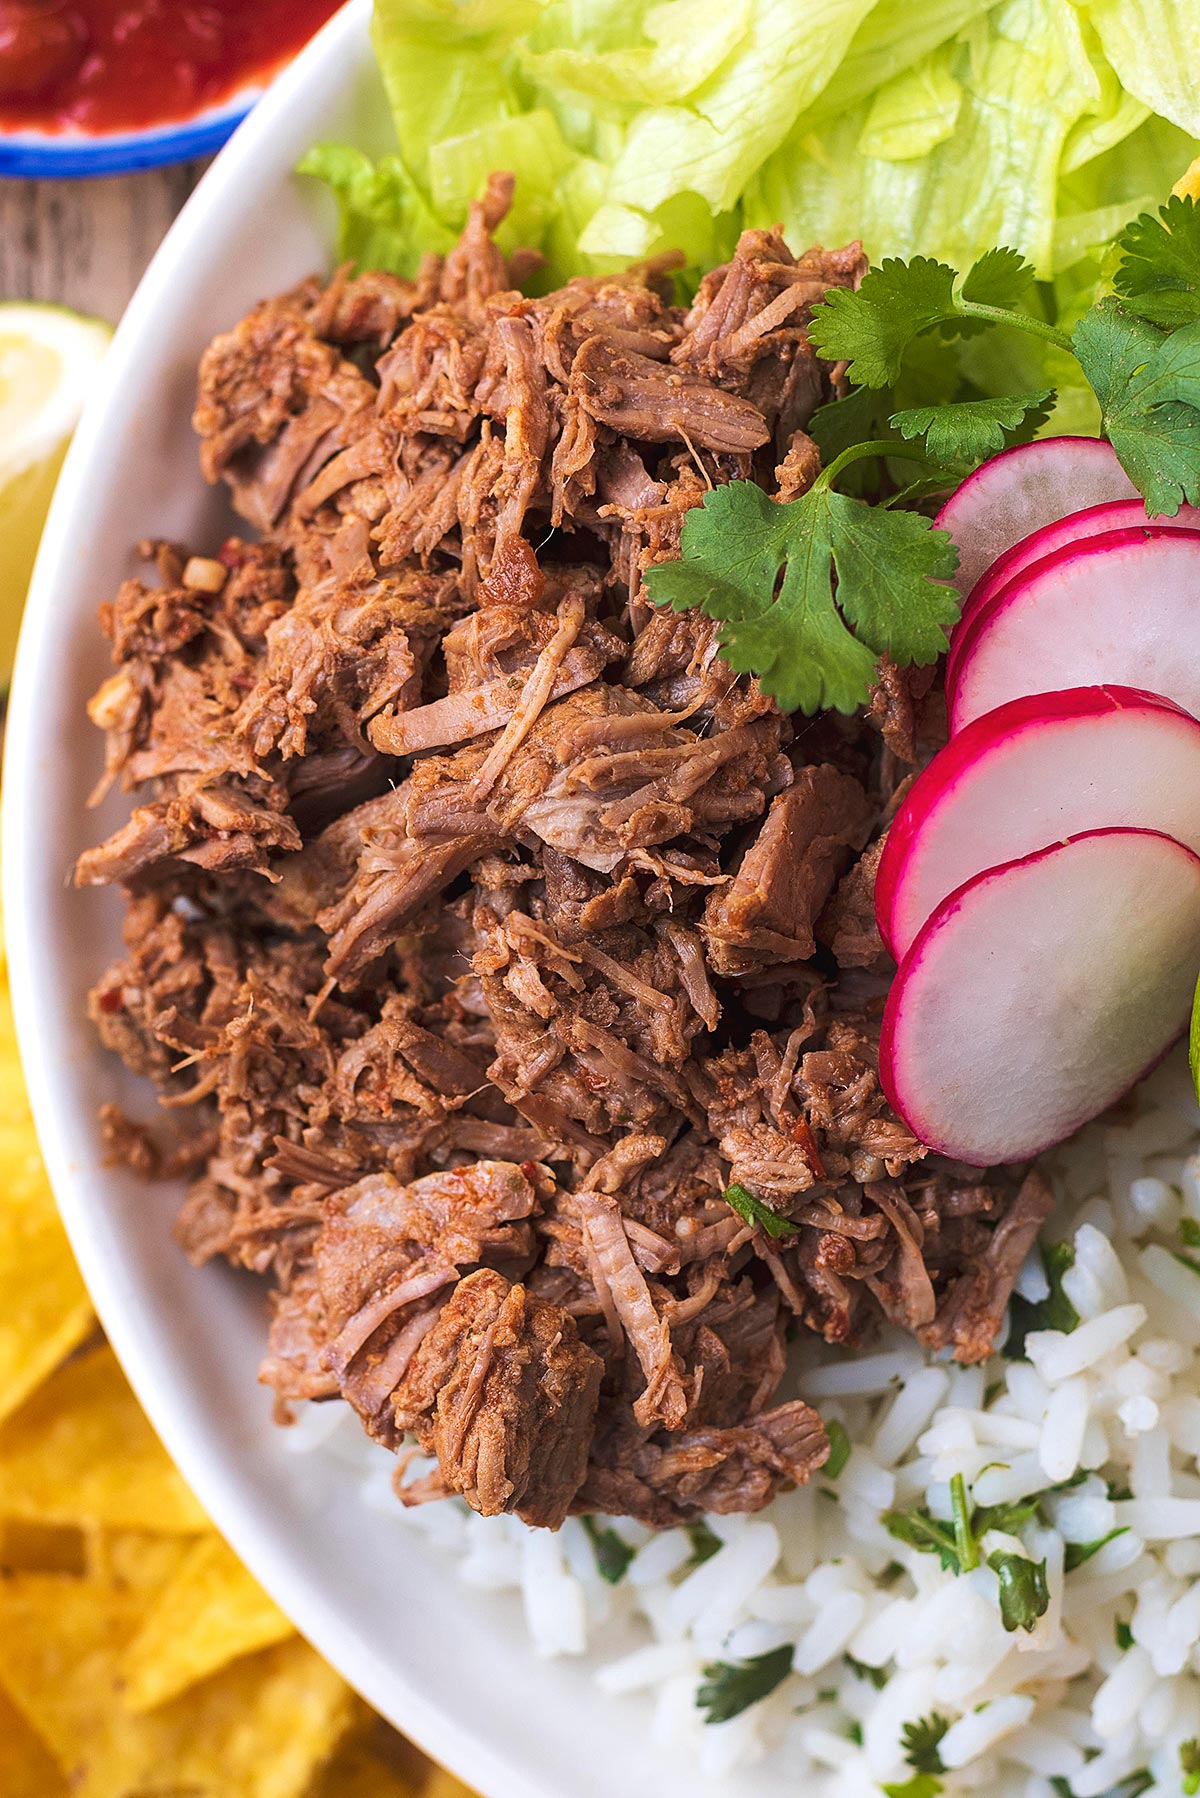 Shredded beef in a bowl with rice and salad.